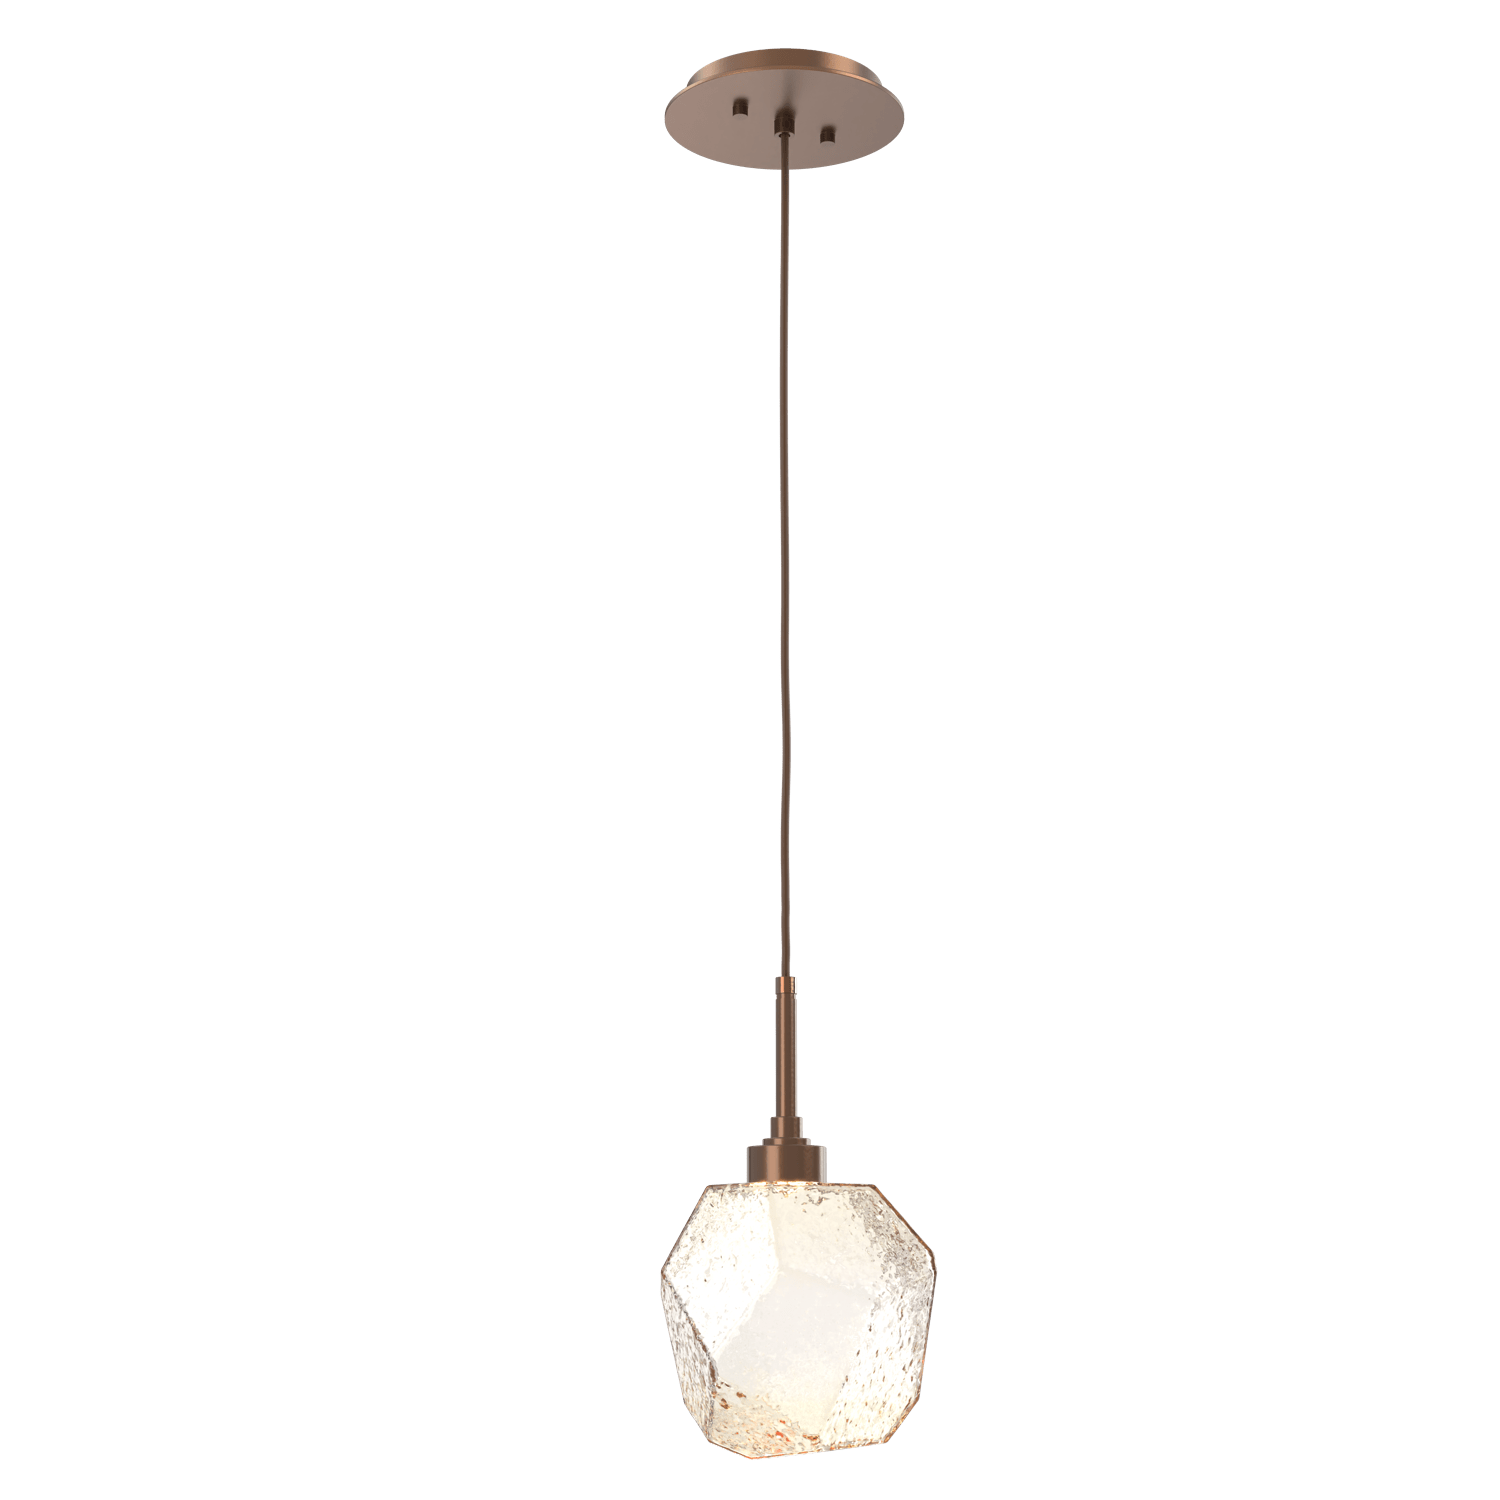 LAB0039-01-BB-A-Hammerton-Studio-Gem-pendant-light-with-burnished-bronze-finish-and-amber-blown-glass-shades-and-LED-lamping